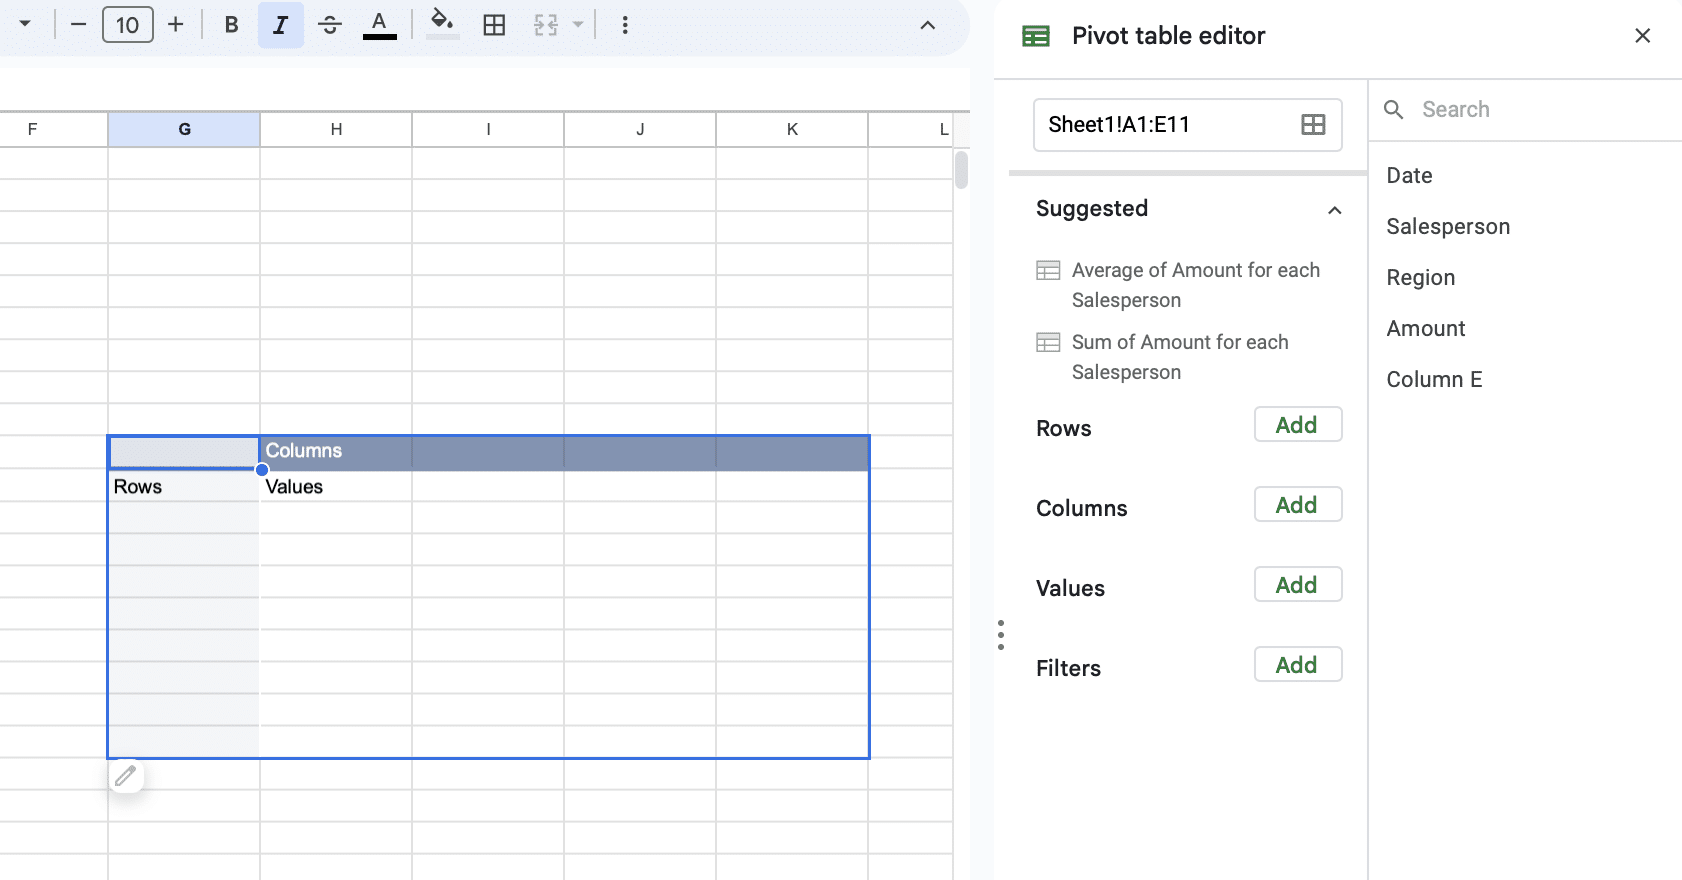 Empty pivot table to custom edit where once can add specific rows, columns, values, and filters.